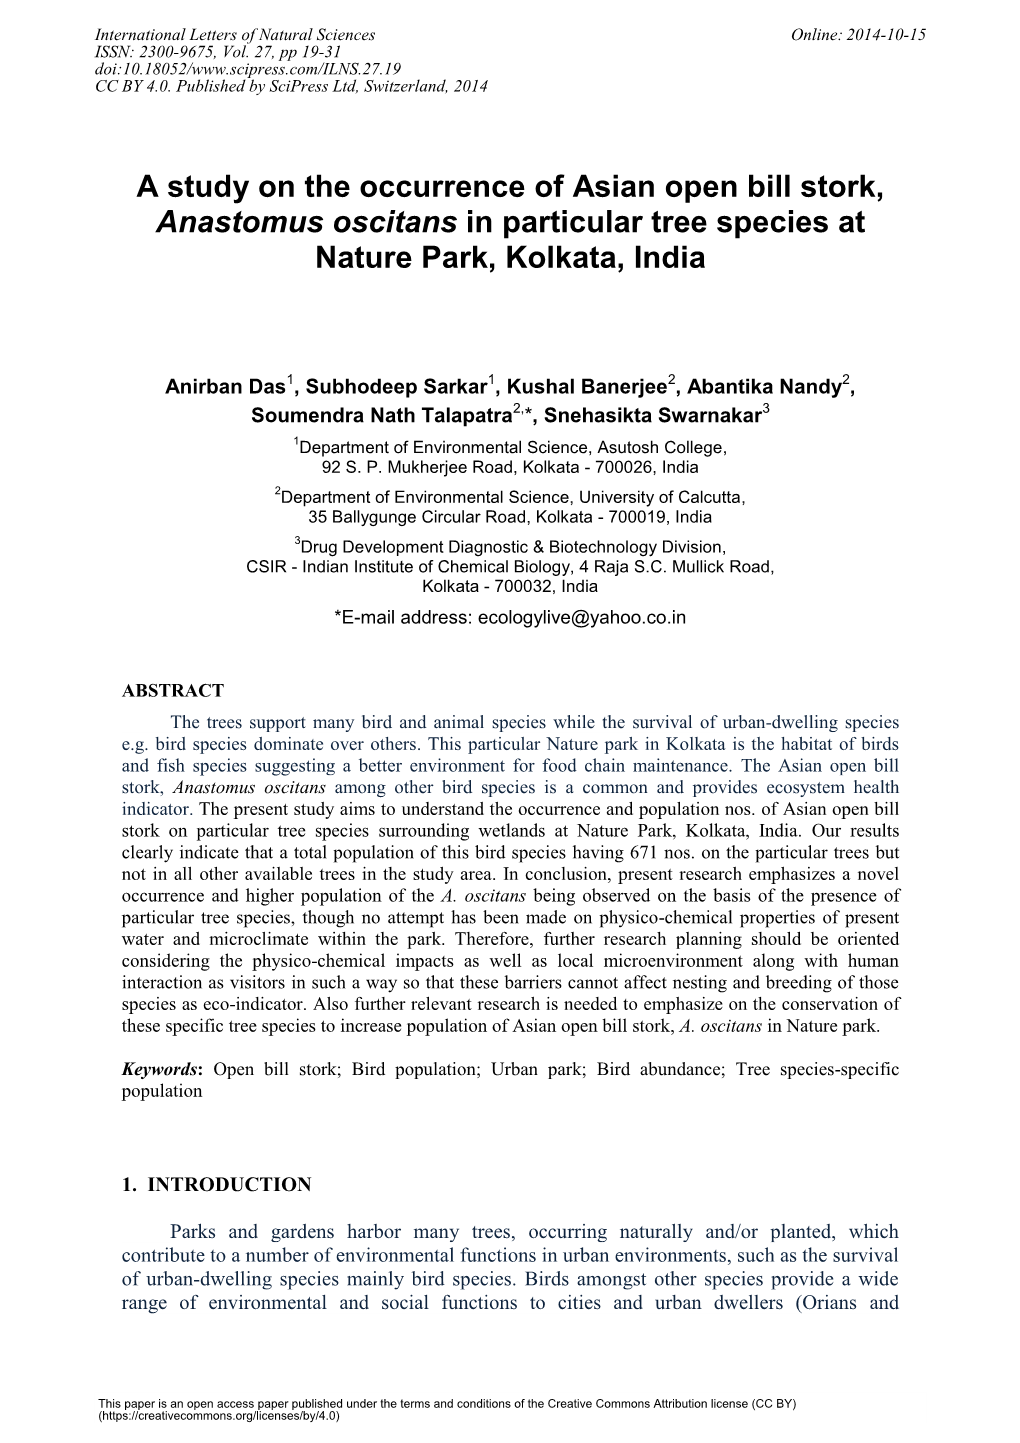 A Study on the Occurrence of Asian Open Bill Stork, Anastomus Oscitans in Particular Tree Species at Nature Park, Kolkata, India